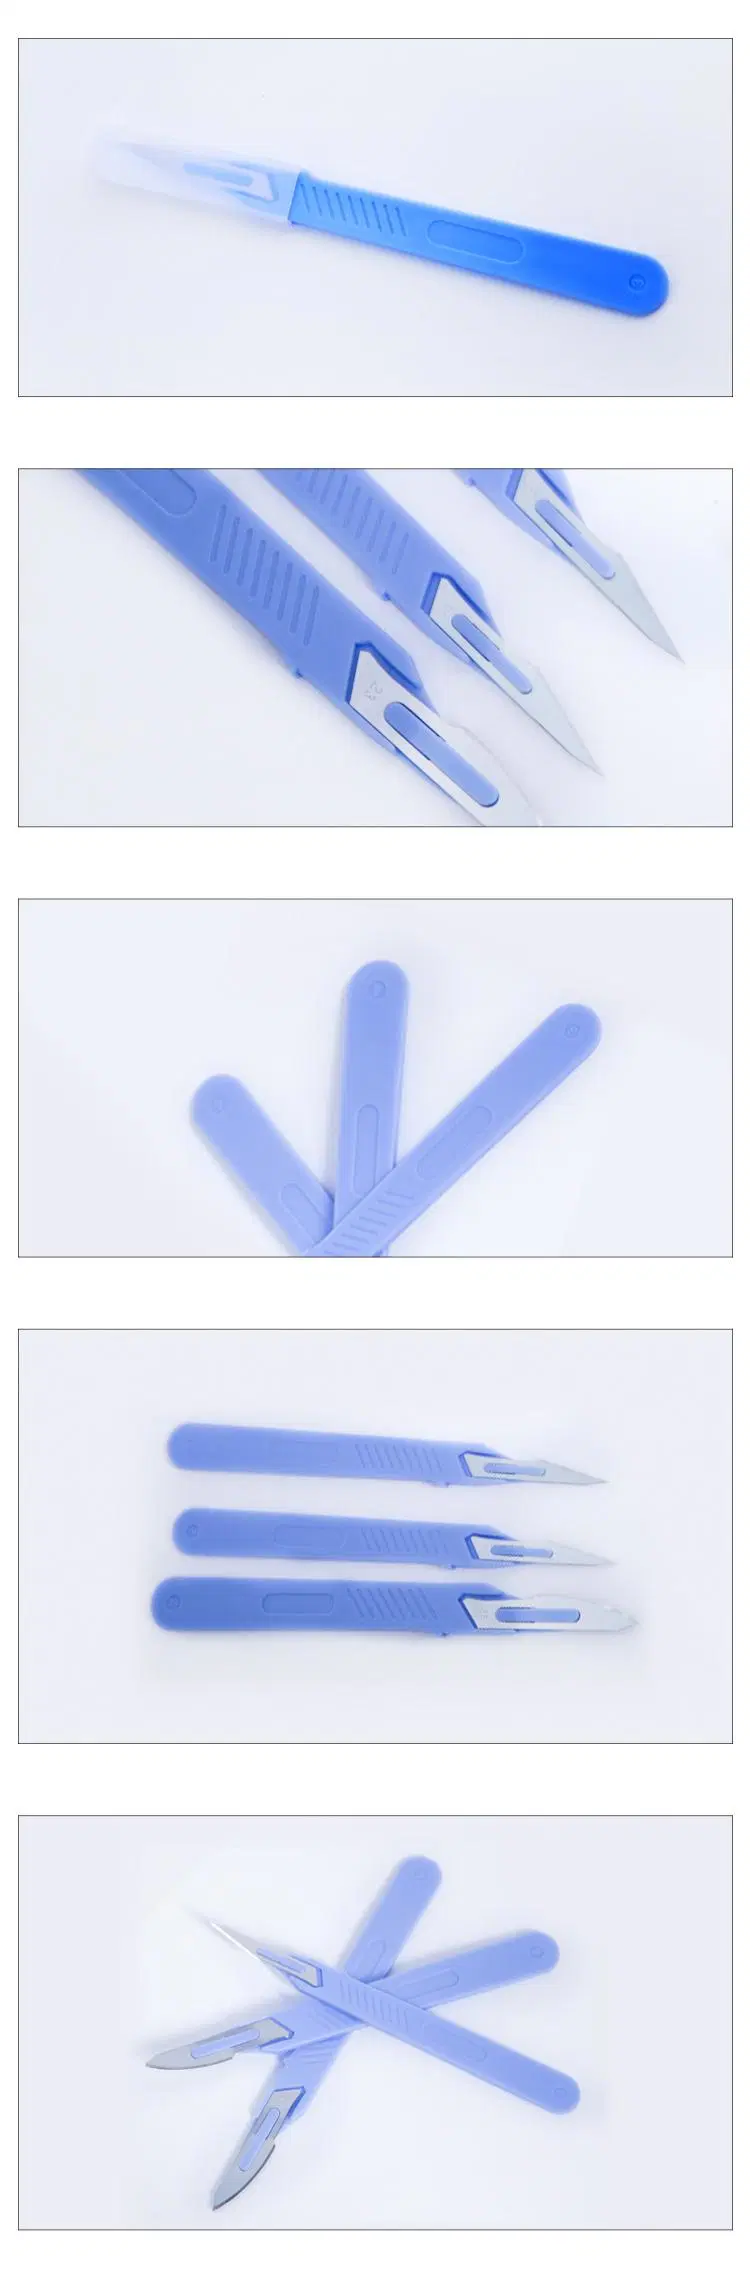 Sharpness Surgical Scalpel Blades for Surgery